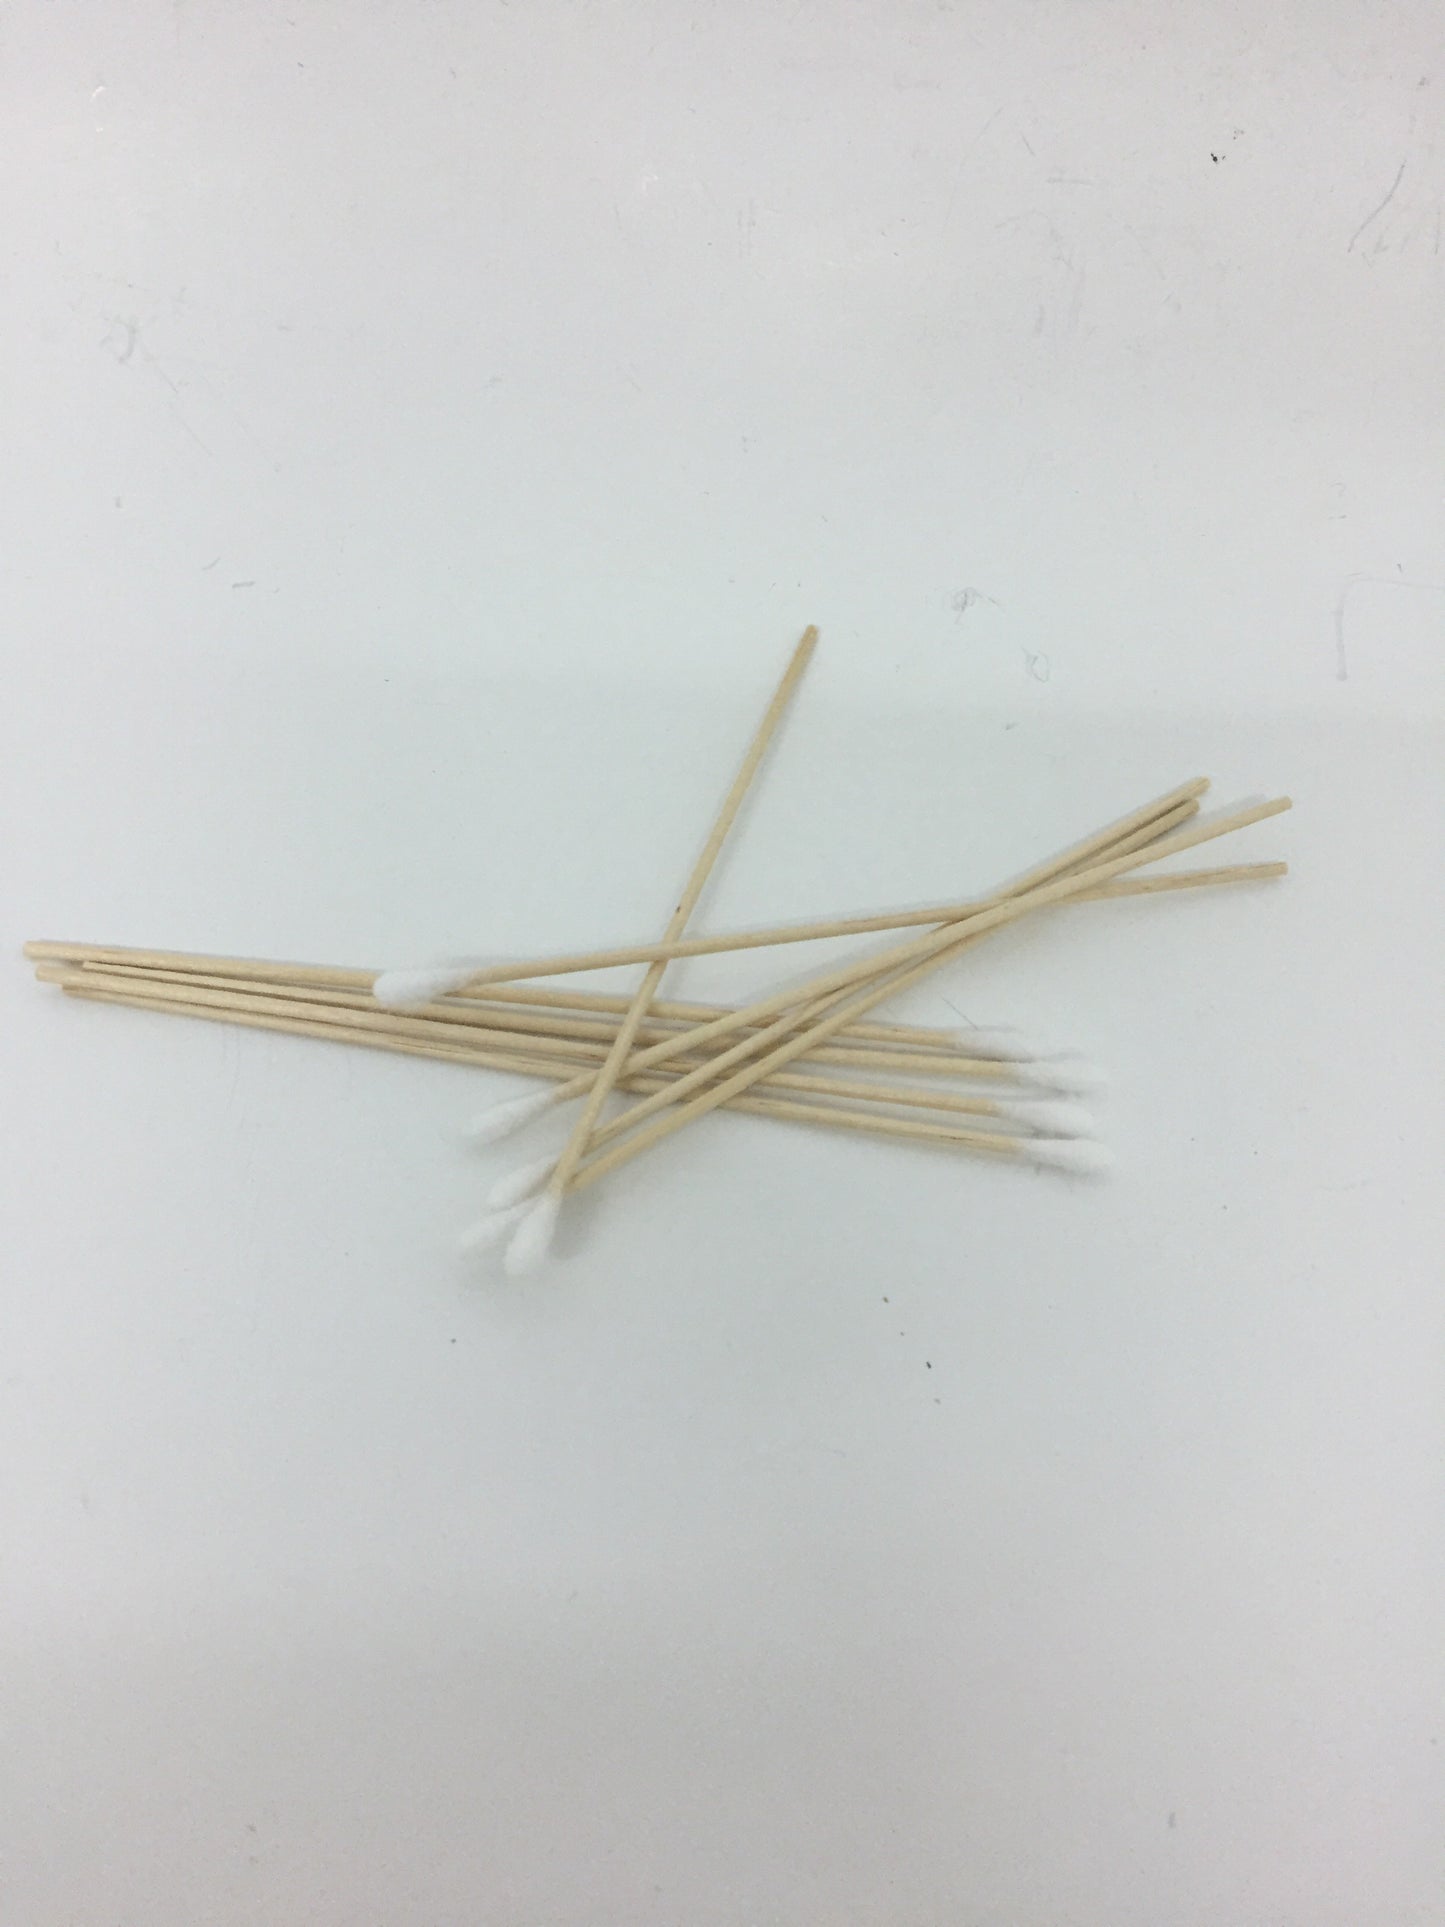 Long wooden cotton swabs/buds for cleaning heads etc pk 5